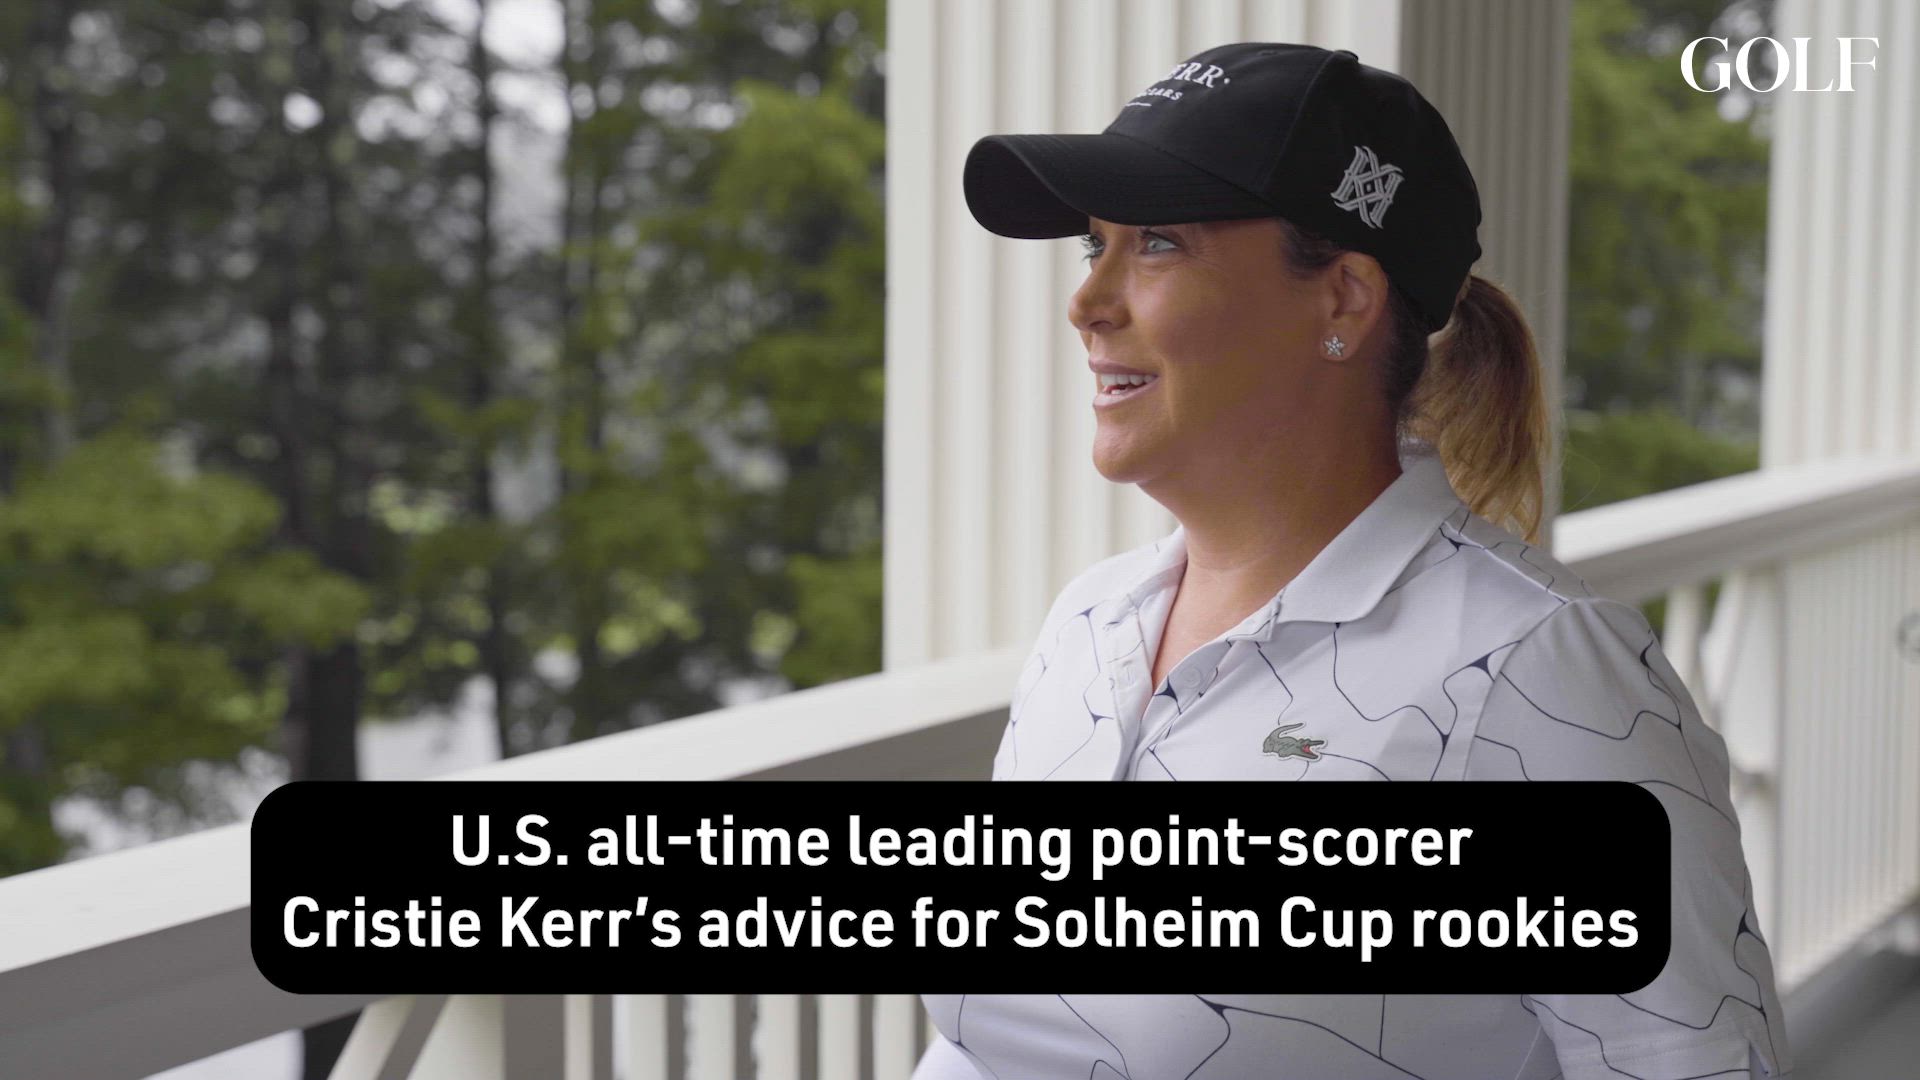 Cristie Kerr's advice to Solheim Cup rookies